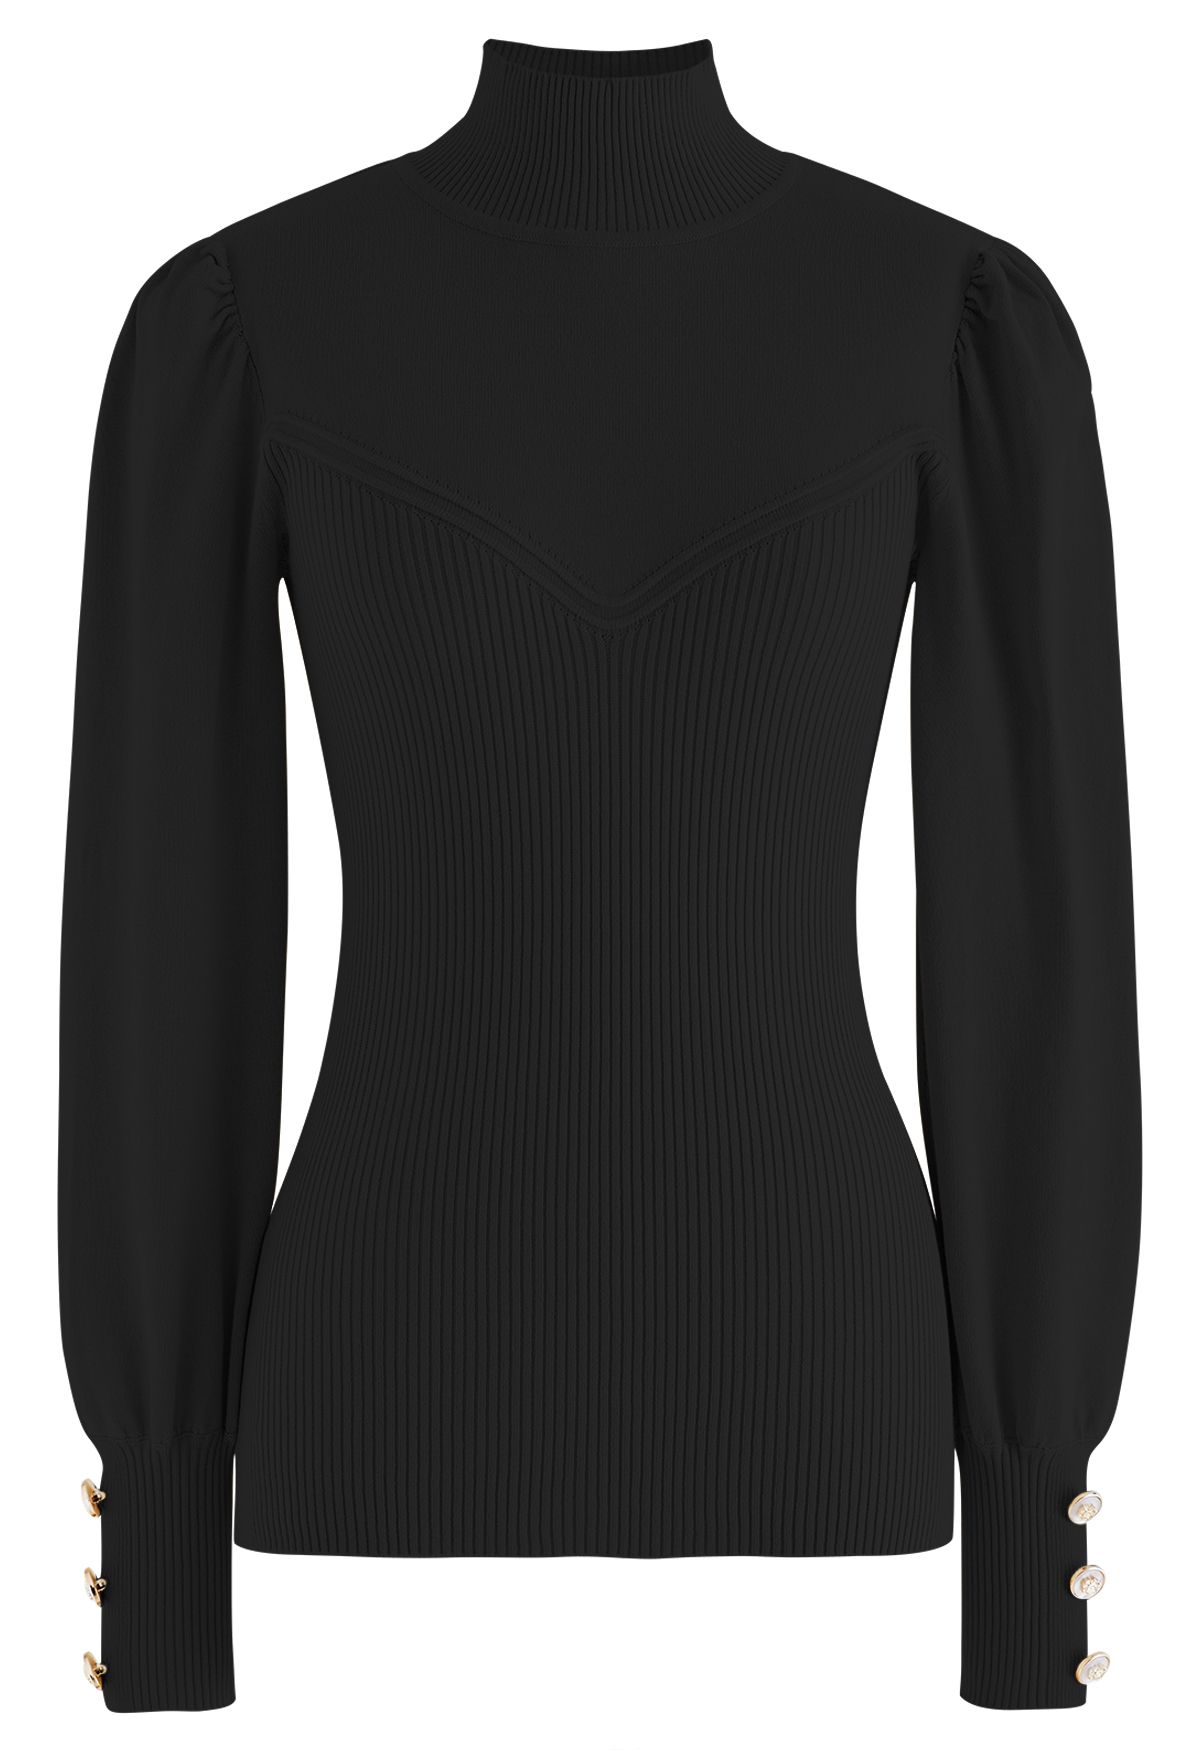 Rib Splicing Fitted Soft Knit Sweater in Black - Retro, Indie and ...